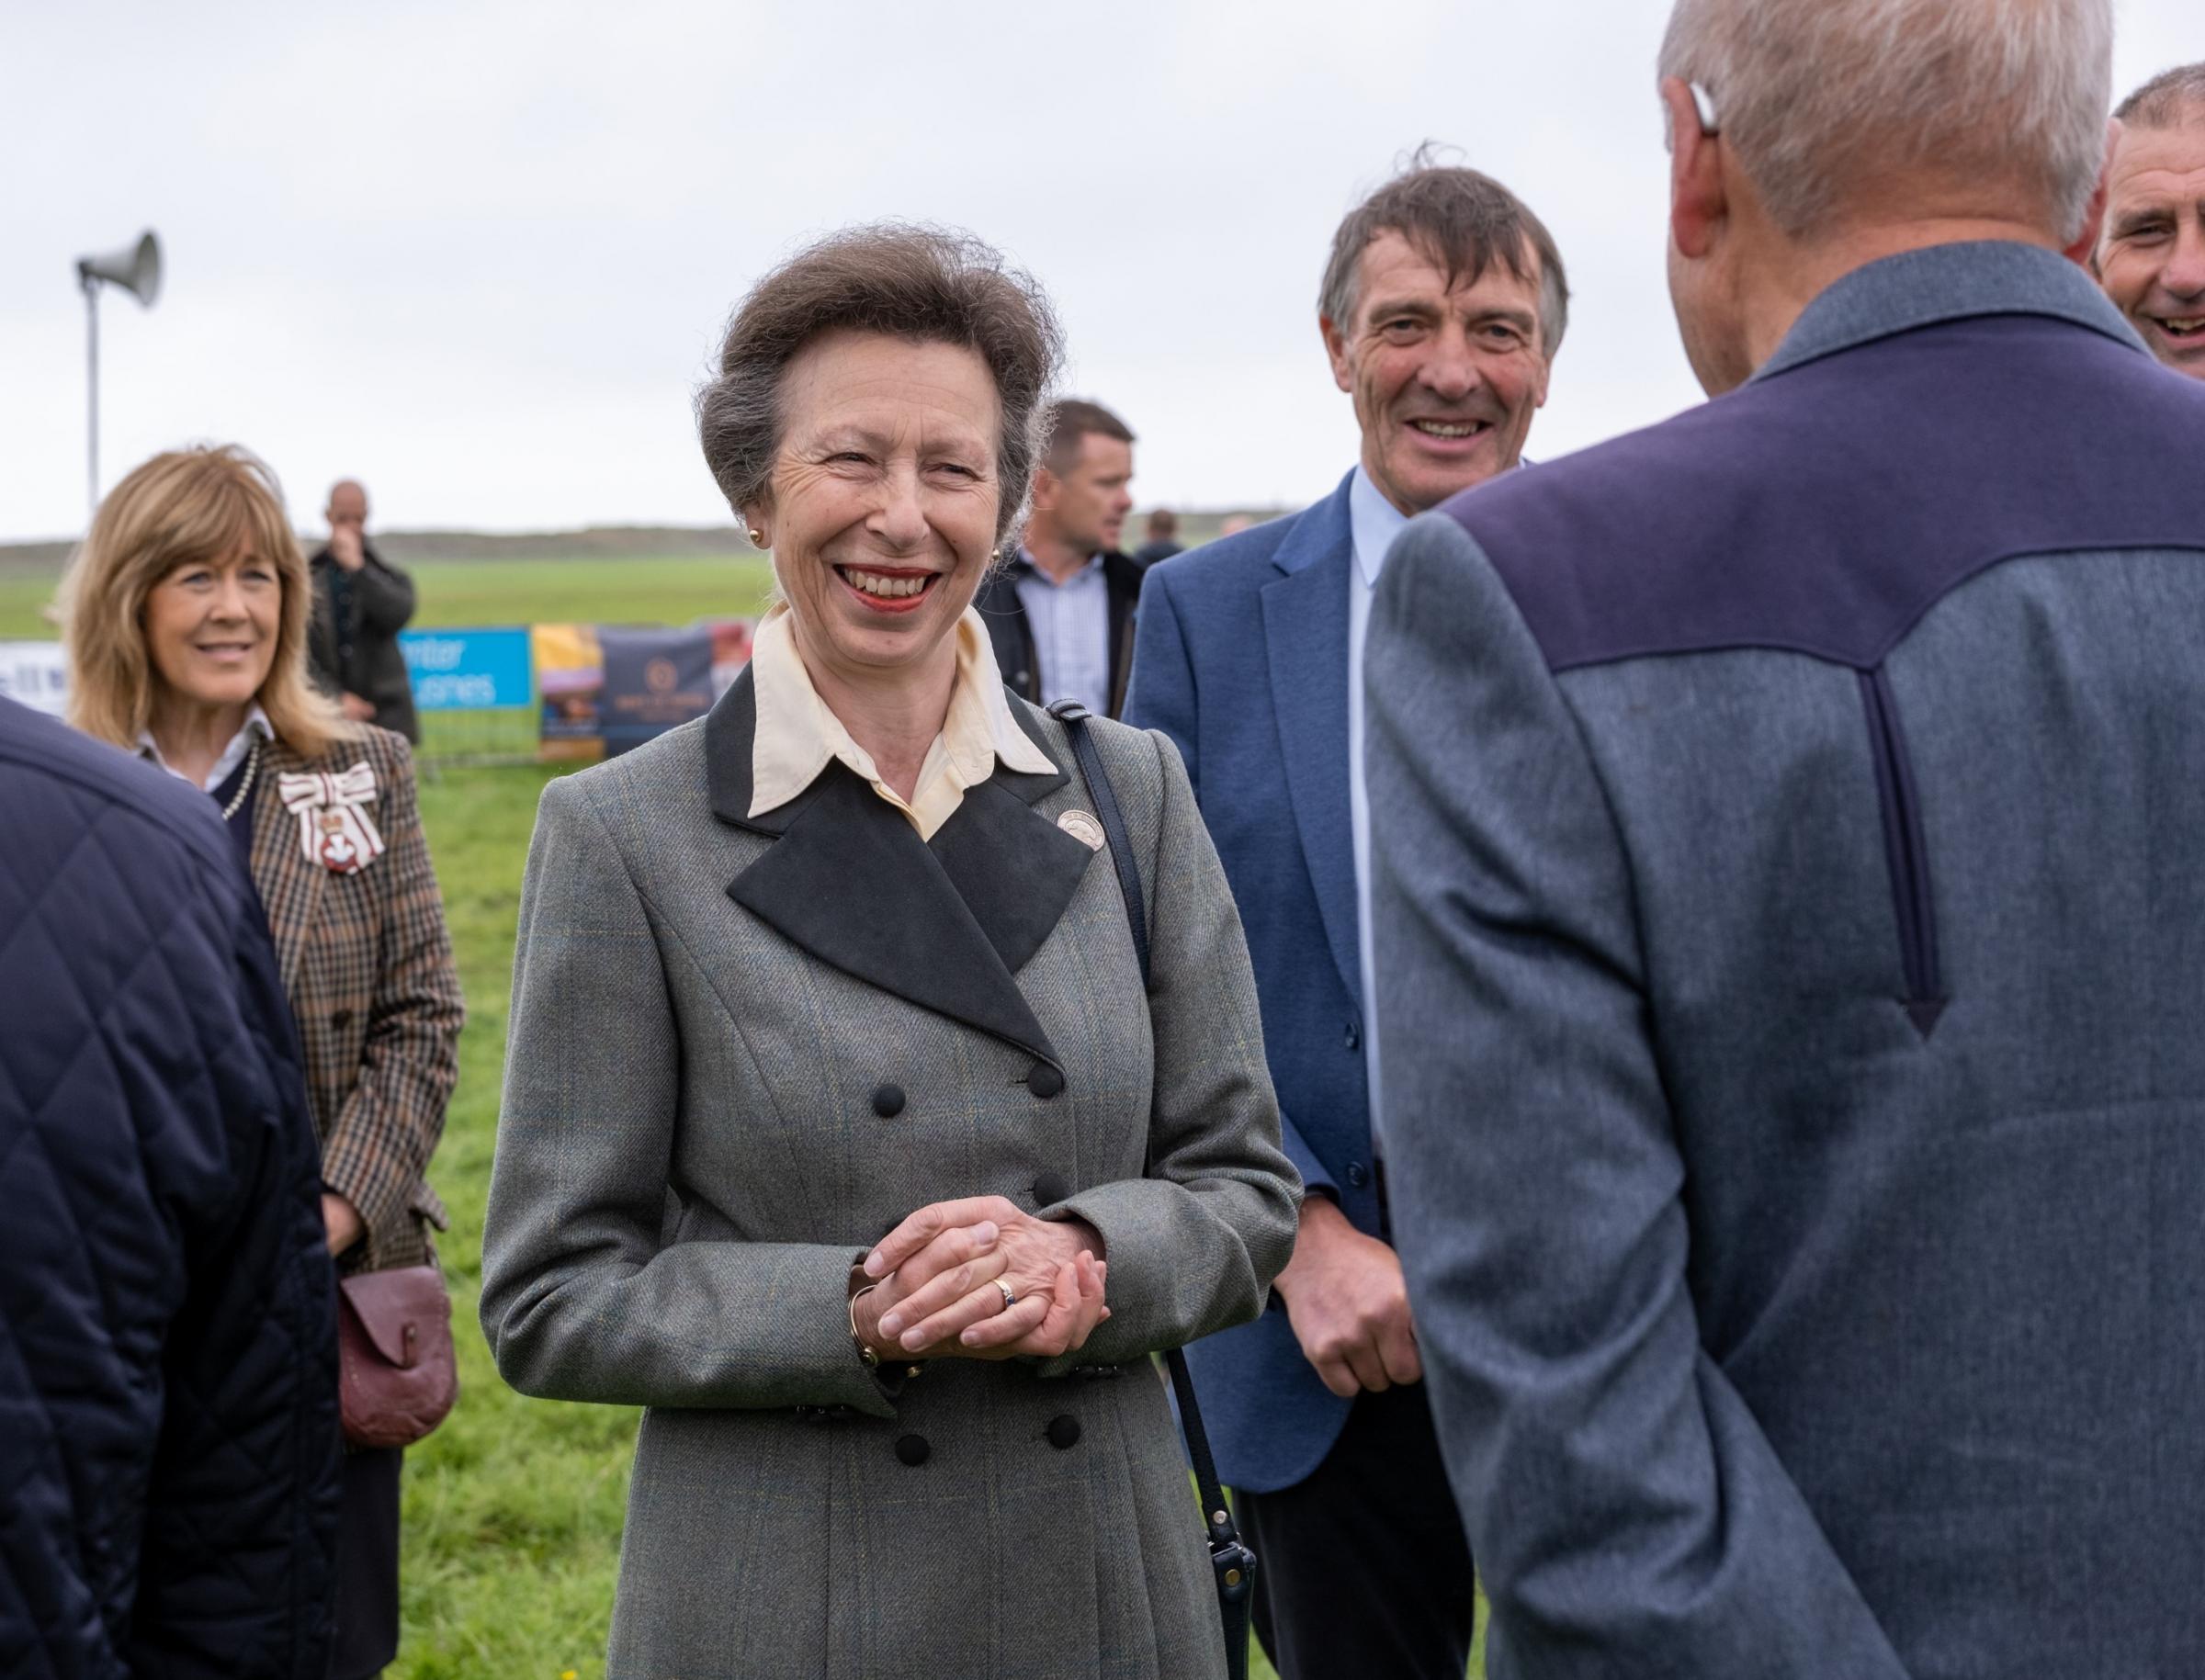 ISDS Patron HRH The Princess Royal was among the visitors to the International. PICTURE Lisa Soar